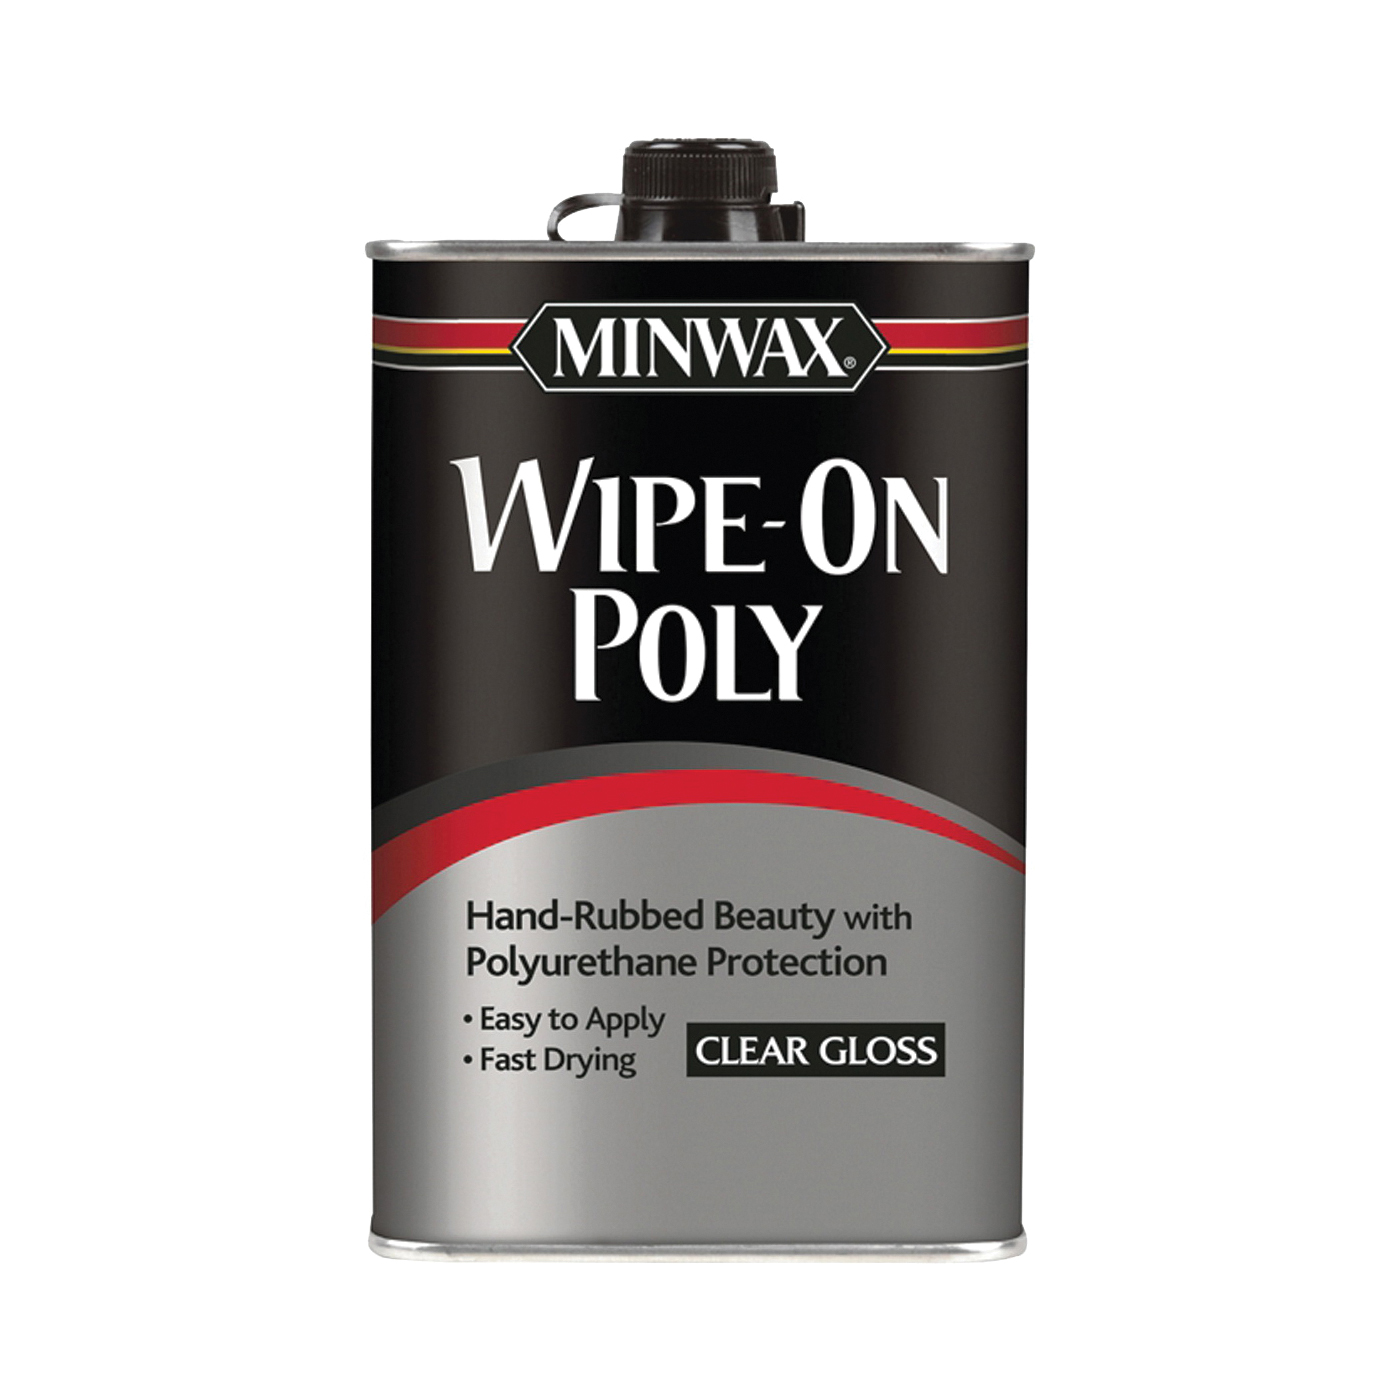 40900000 Wipe-On Poly Paint, Gloss, Liquid, Clear, 1 pt, Can